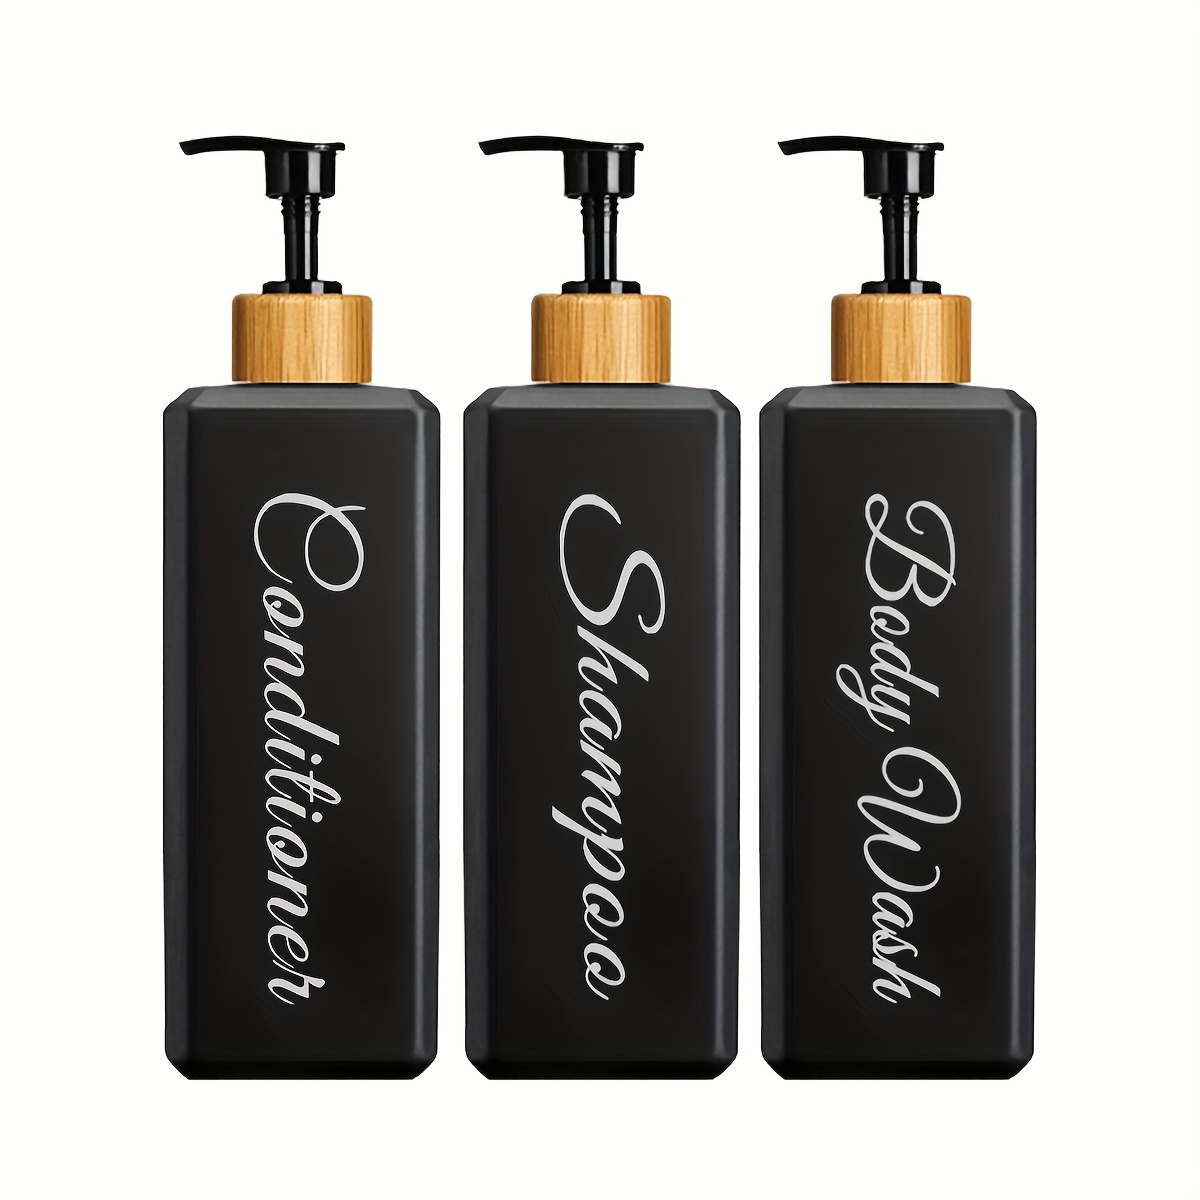 

3pcs Shampoo And Conditioner Dispenser, Refillable Black/white Refillable Shampoo And Conditioner Bottles With Bamboo Pump, Modern Bathroom Shower Bottles Set For Shampoo Conditioner Body Wash - 500ml